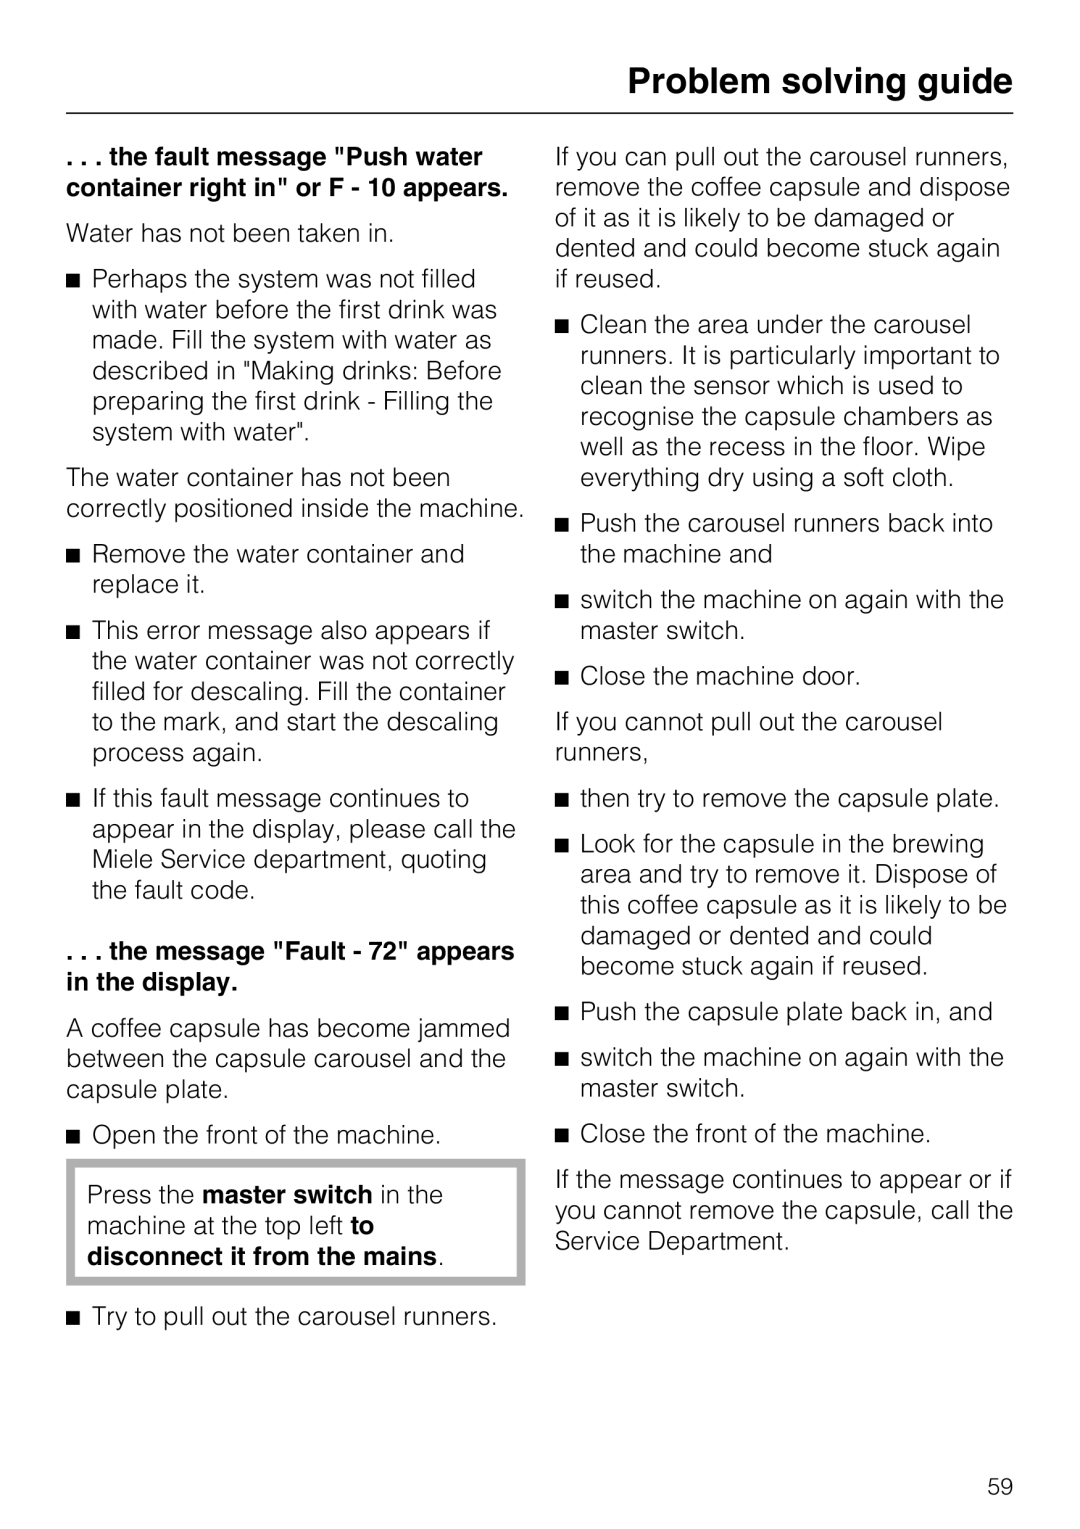 Miele CVA 3650 installation instructions the message Fault - 72 appears in the display, Problem solving guide 